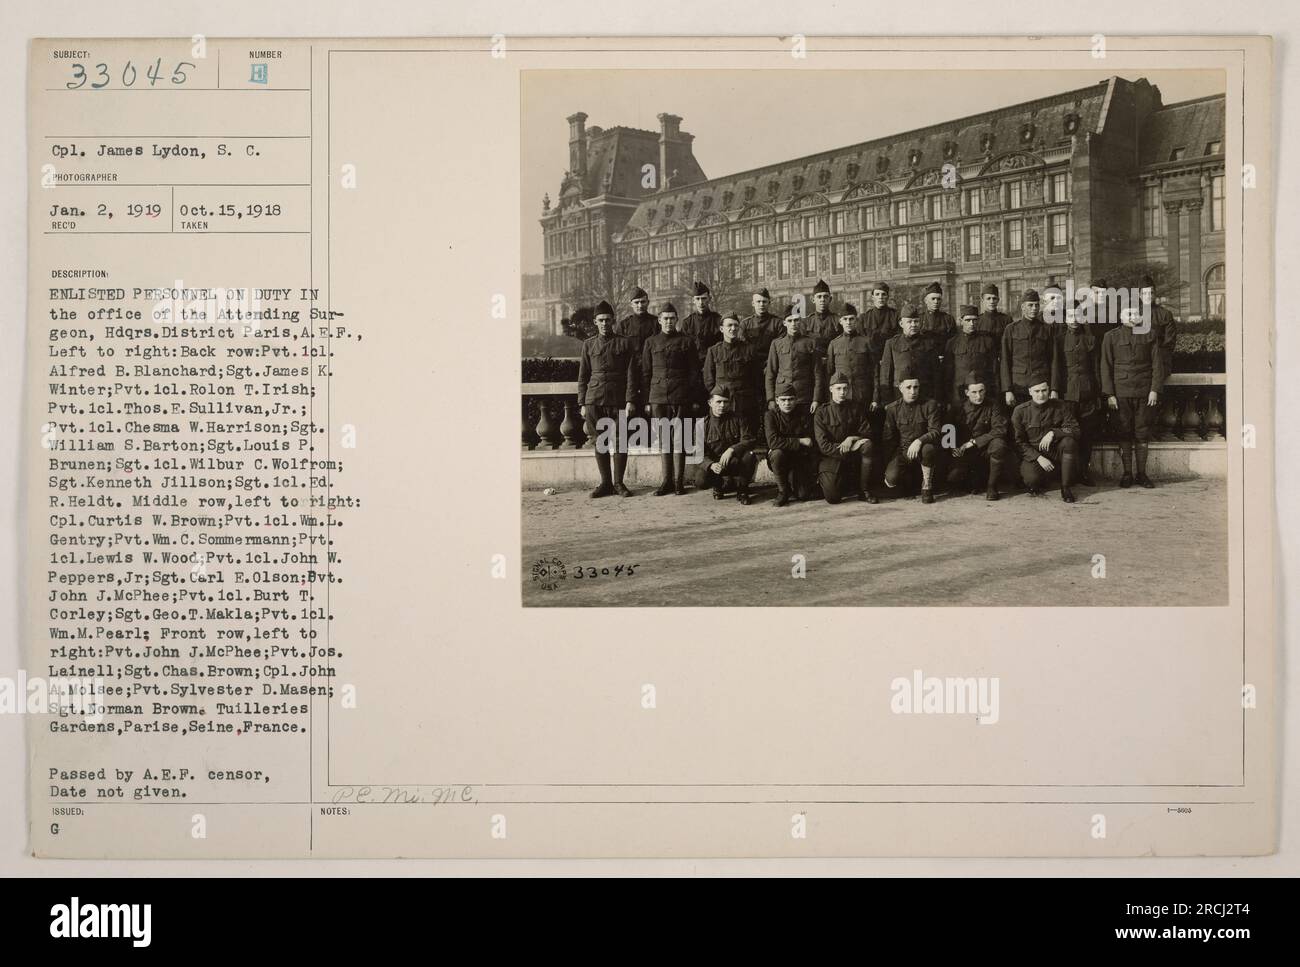 Enlisted personnel on duty in the office of the Attending Surgeon, Hdqrs. District Paris, A.E.F. Pictured are soldiers from various ranks, including Pvt. 101. Alfred B. Blanchard, Sgt. James K. Winter, Pvt. 1cl. Rolon T.Irish, and others. The photo was taken in the Tuilleries Gardens, Paris, France during World War One. Caption contains factual information. Stock Photo